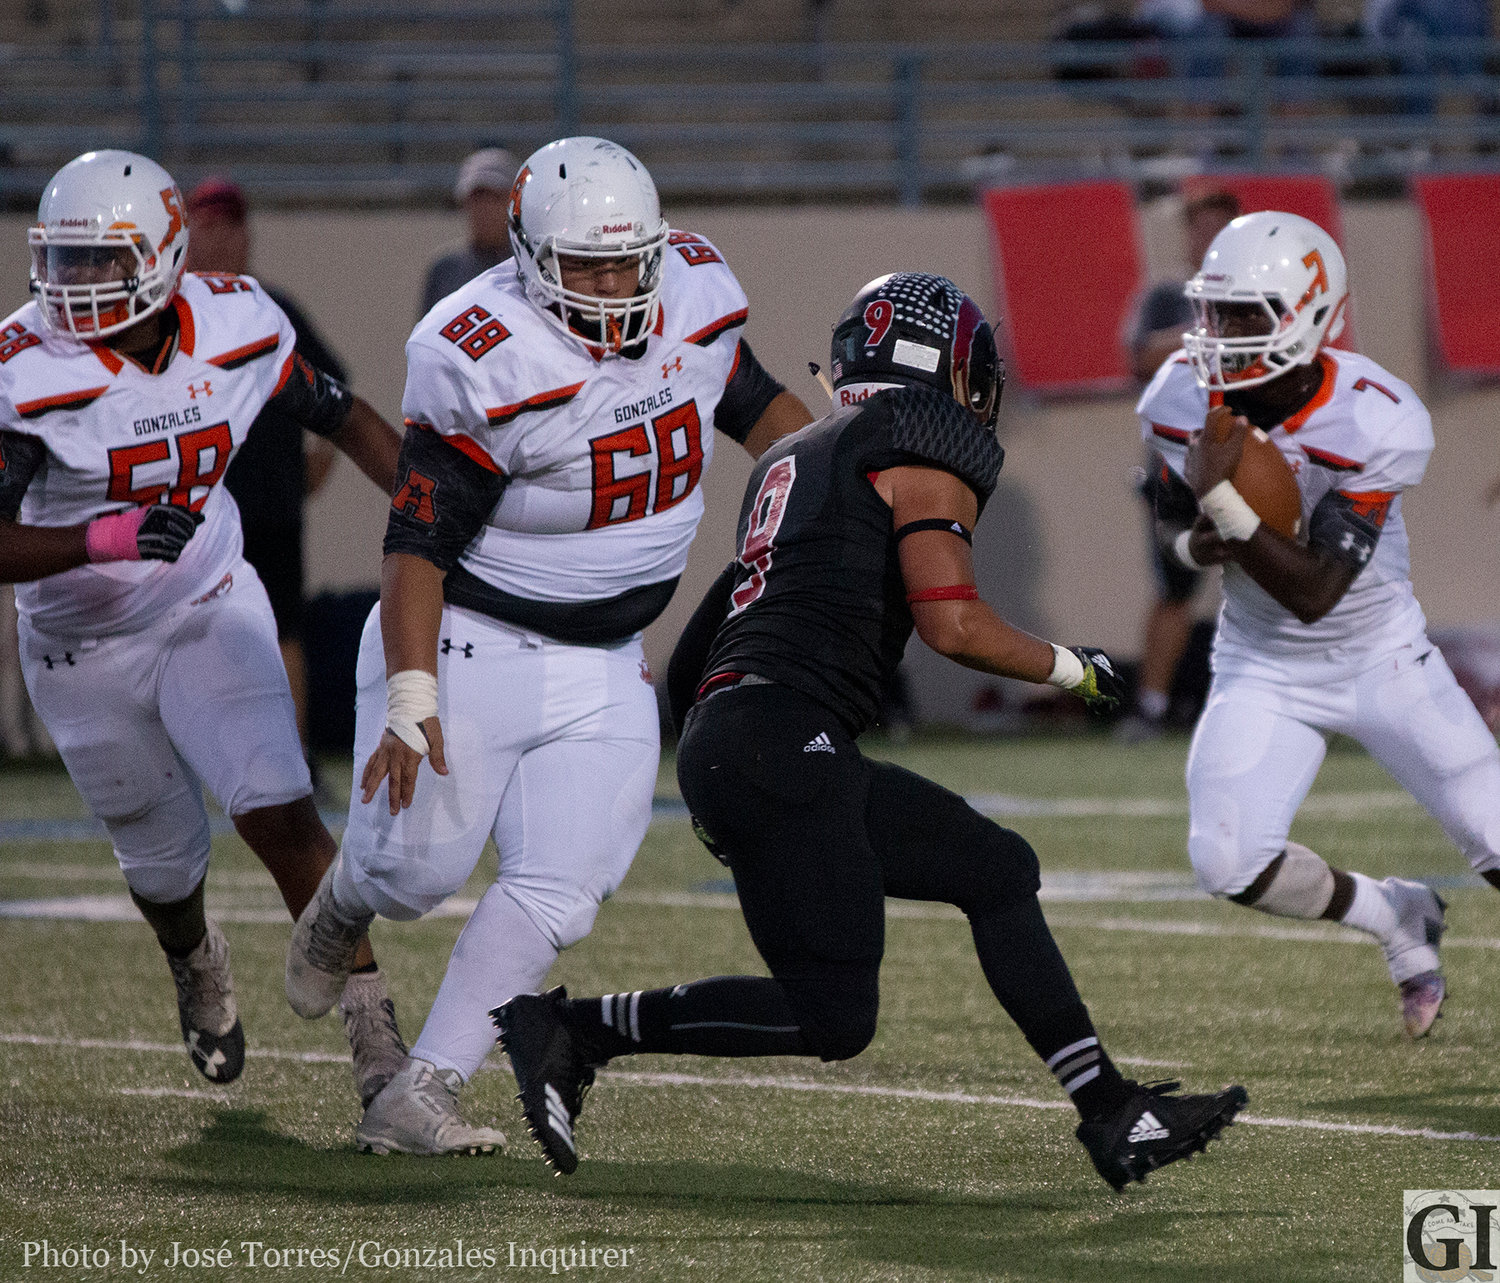 The Apaches offense will lean on its line for success against Pleasanton this Friday. Pictured are offensive linemen Desmond Bolden (58) and Larry Gomez (68) creating running lanes for Elijah Holiday (7).